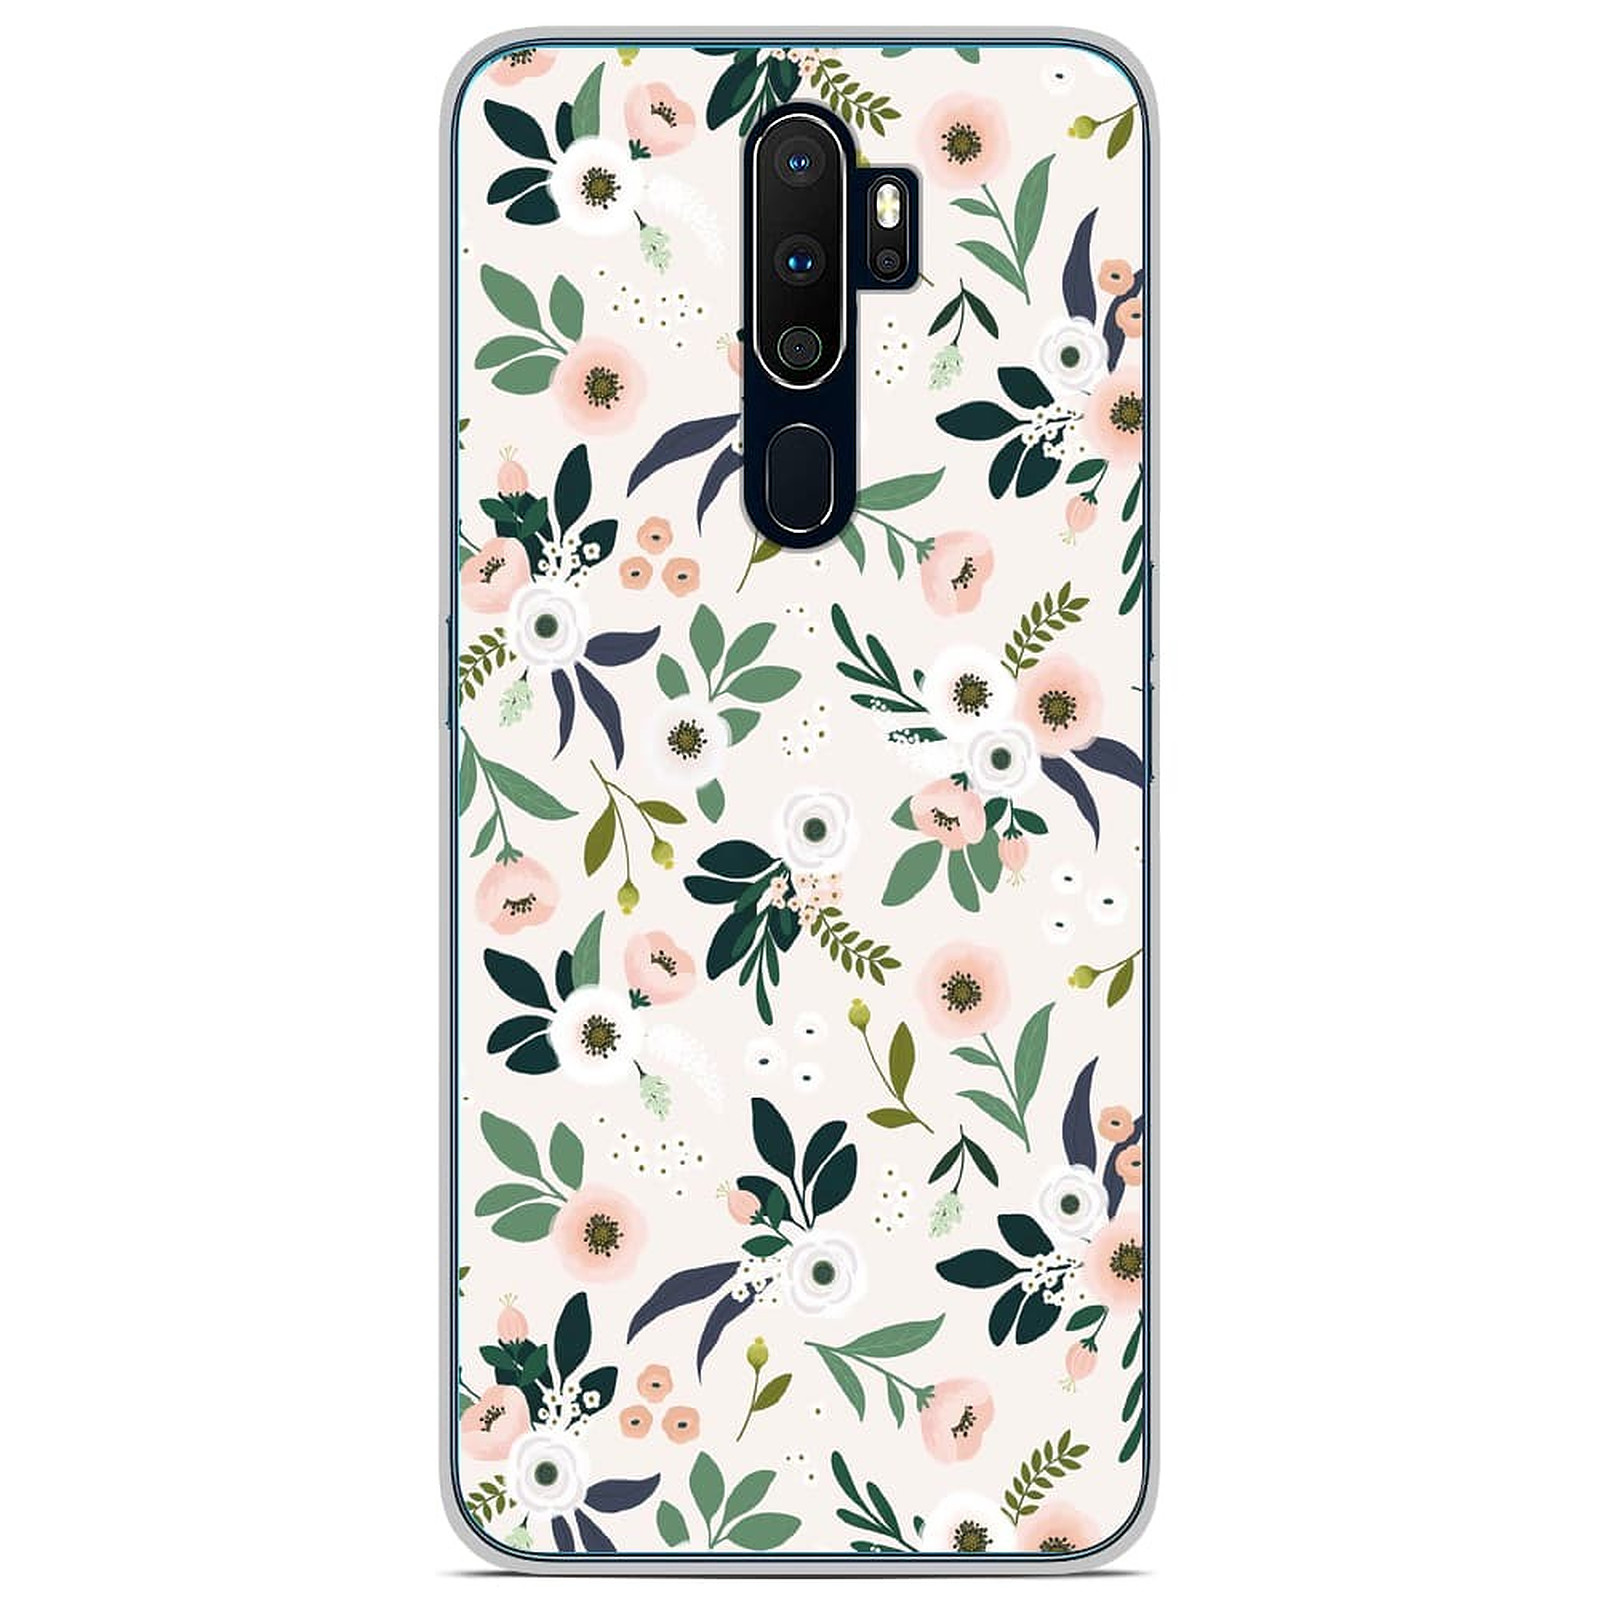 1001 Coques Coque silicone gel Oppo A9 2020 motif Flowers - Coque telephone 1001Coques